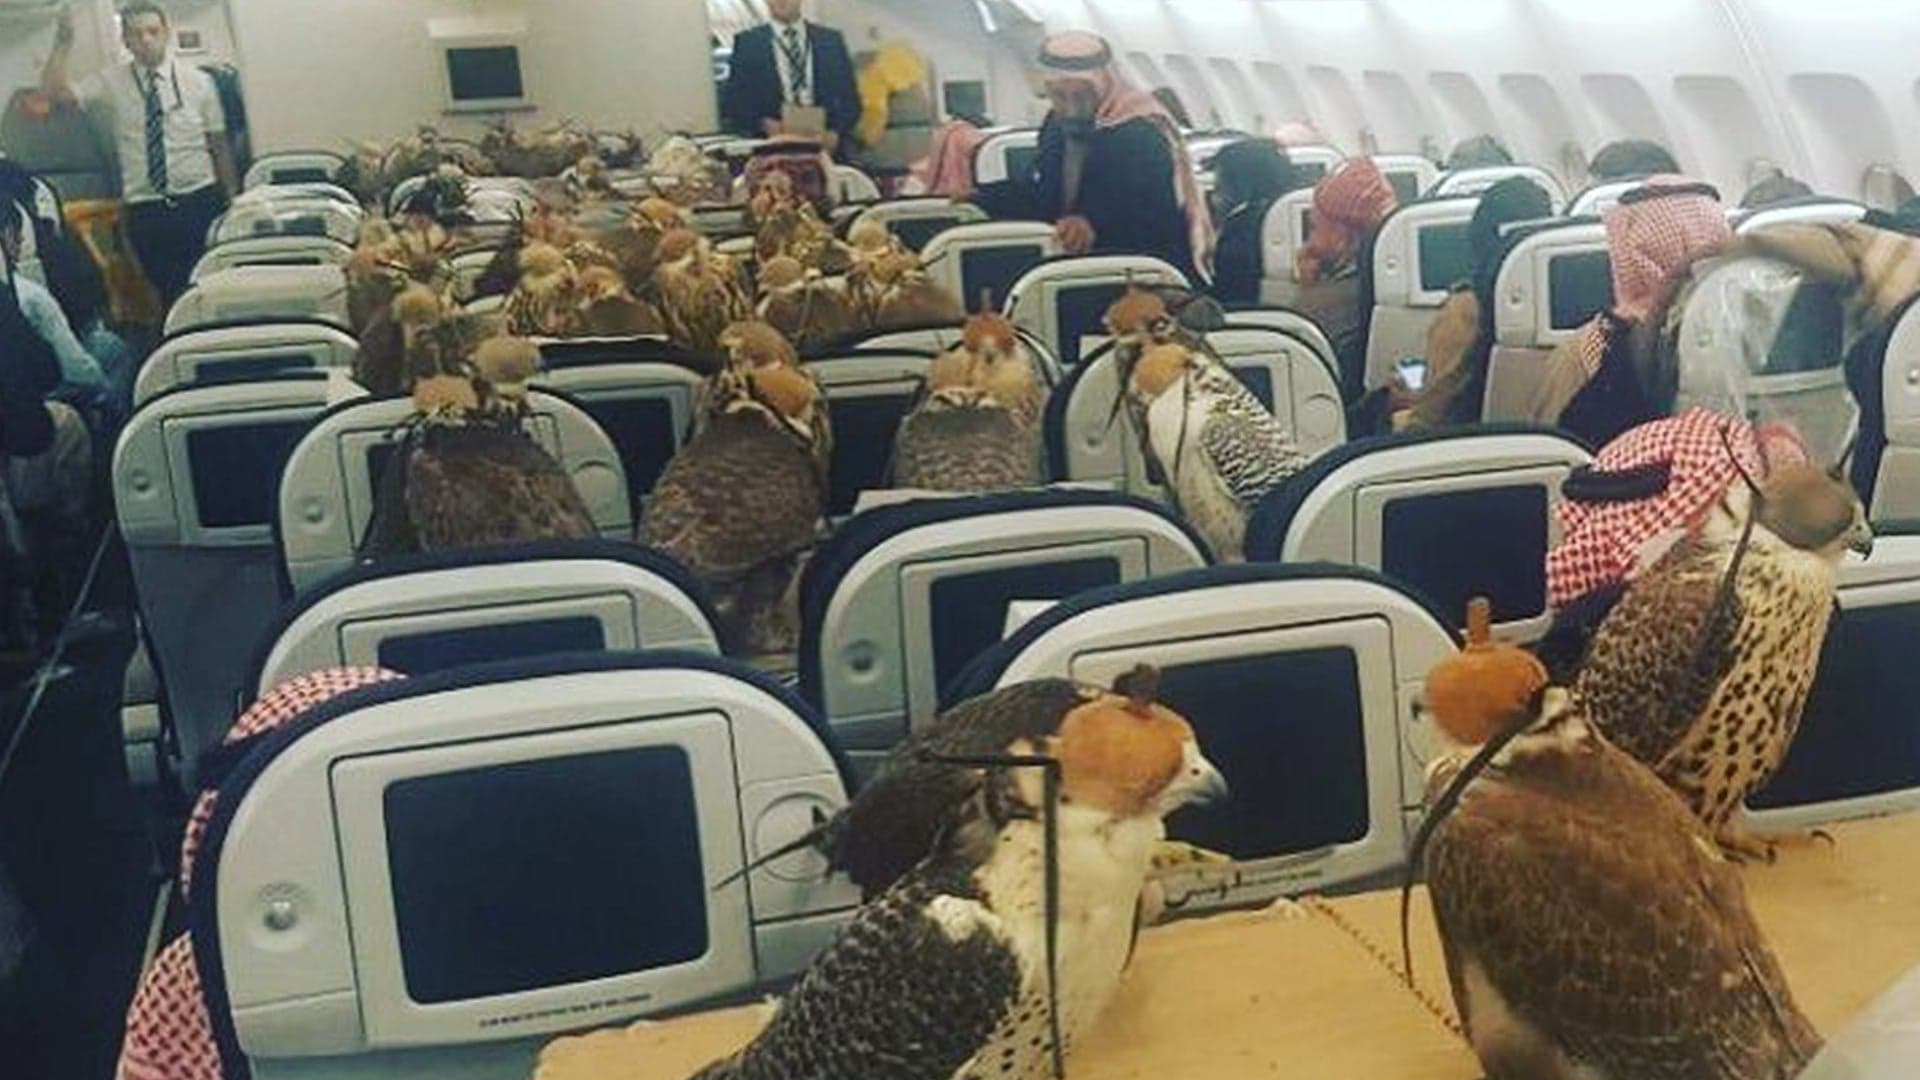 Saudi Prince Apparently Bought Plane Tickets for 80 Falcons